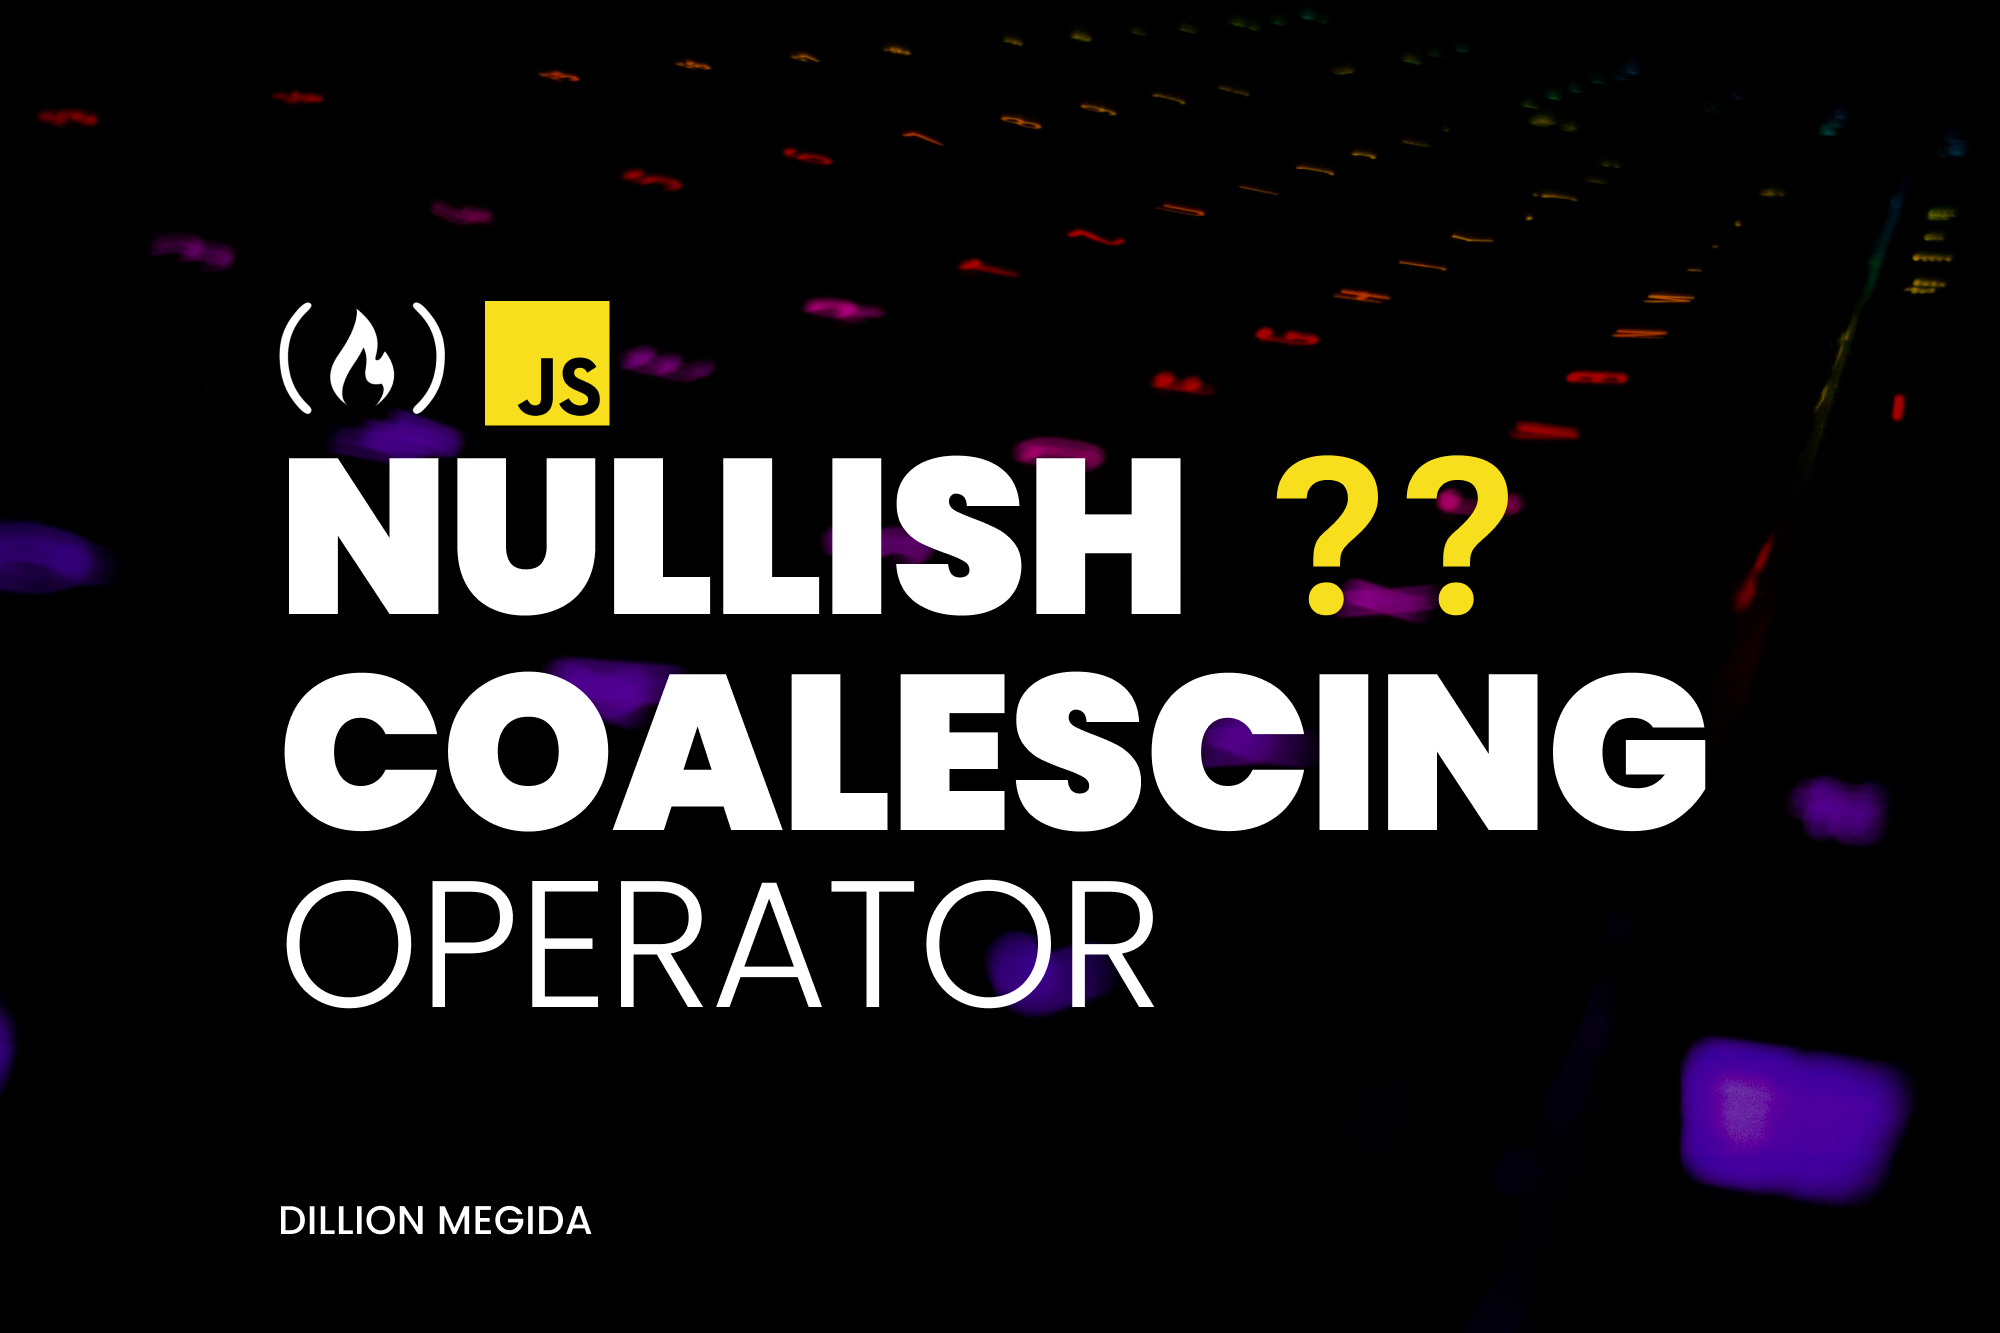 What is the Nullish Coalescing Operator in JavaScript, and how is it useful